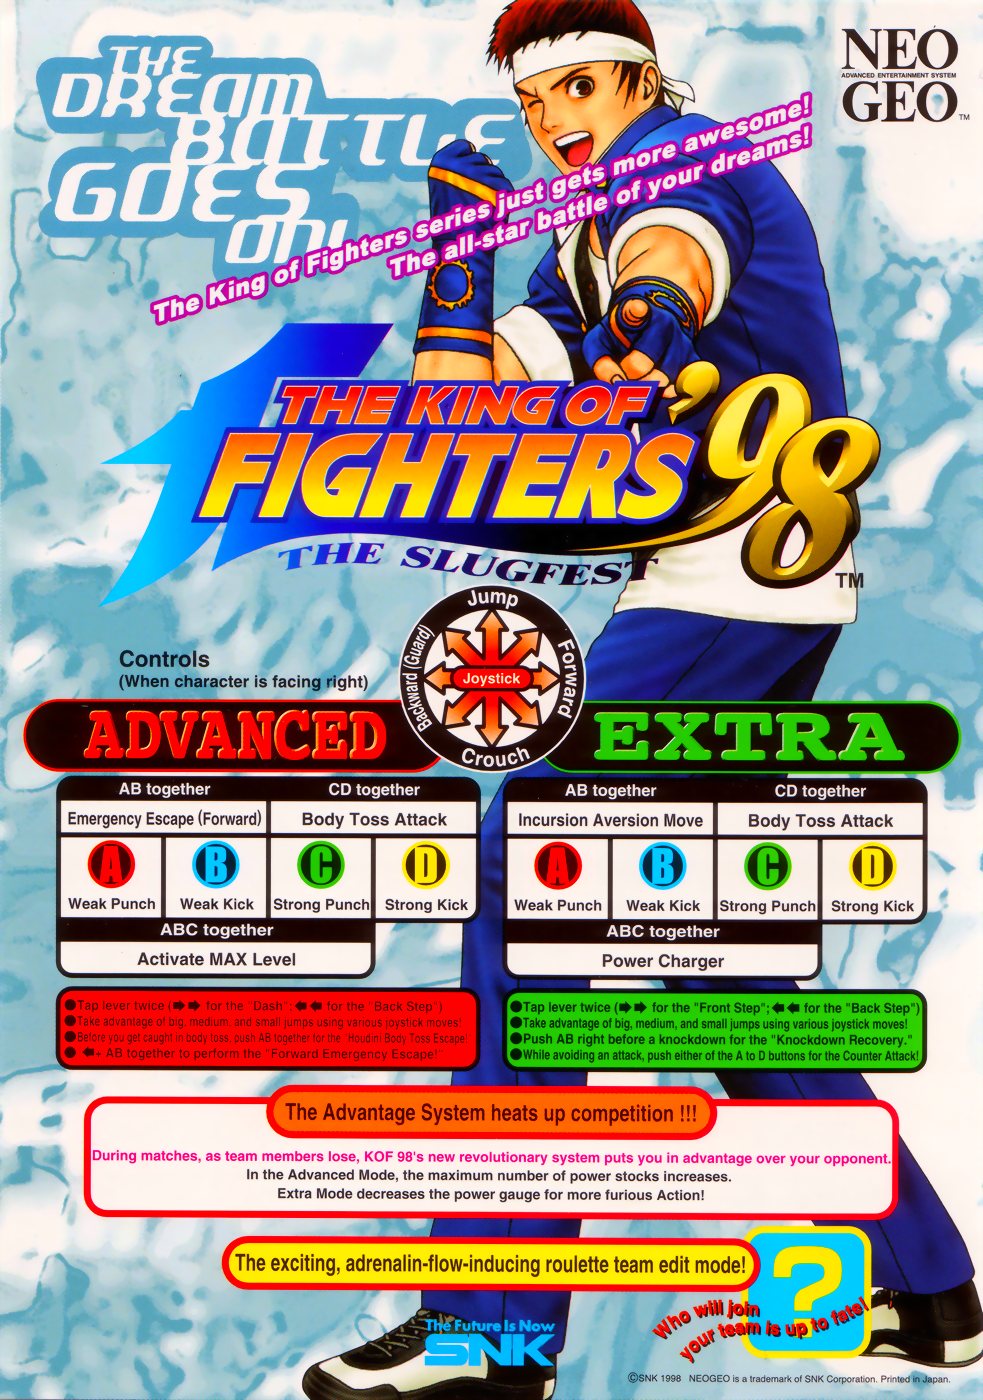 The King of Fighters '98: The Slugfest / King of Fighters '98: Dream Match Never Ends (Korean Board) flyer